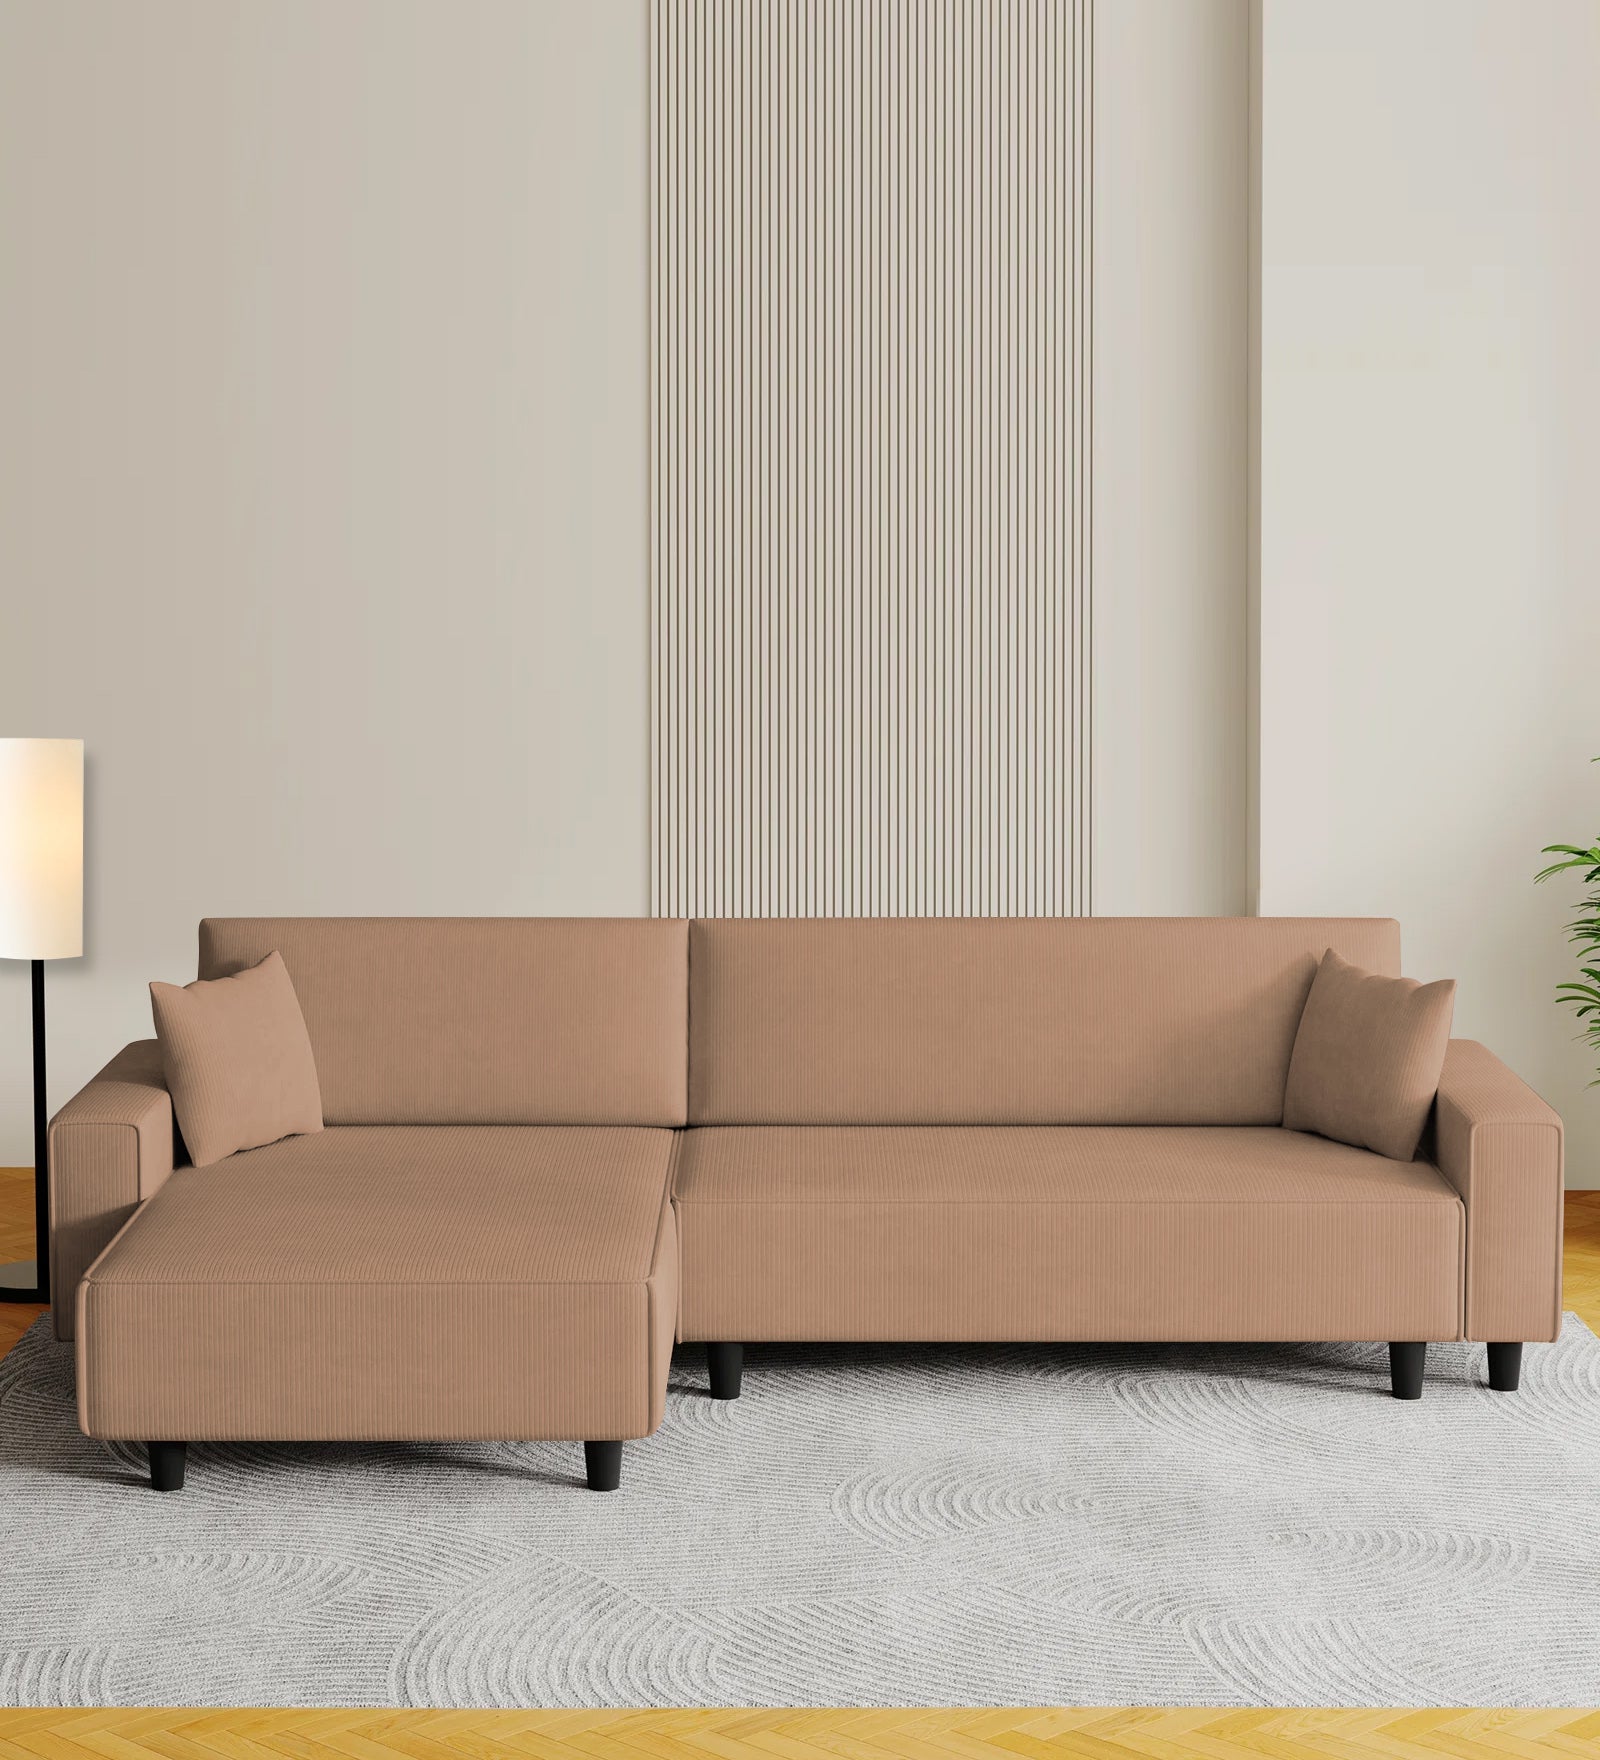 Peach Fabric RHS 6 Seater Sectional Sofa Cum Bed With Storage In Cosmic Beige Colour